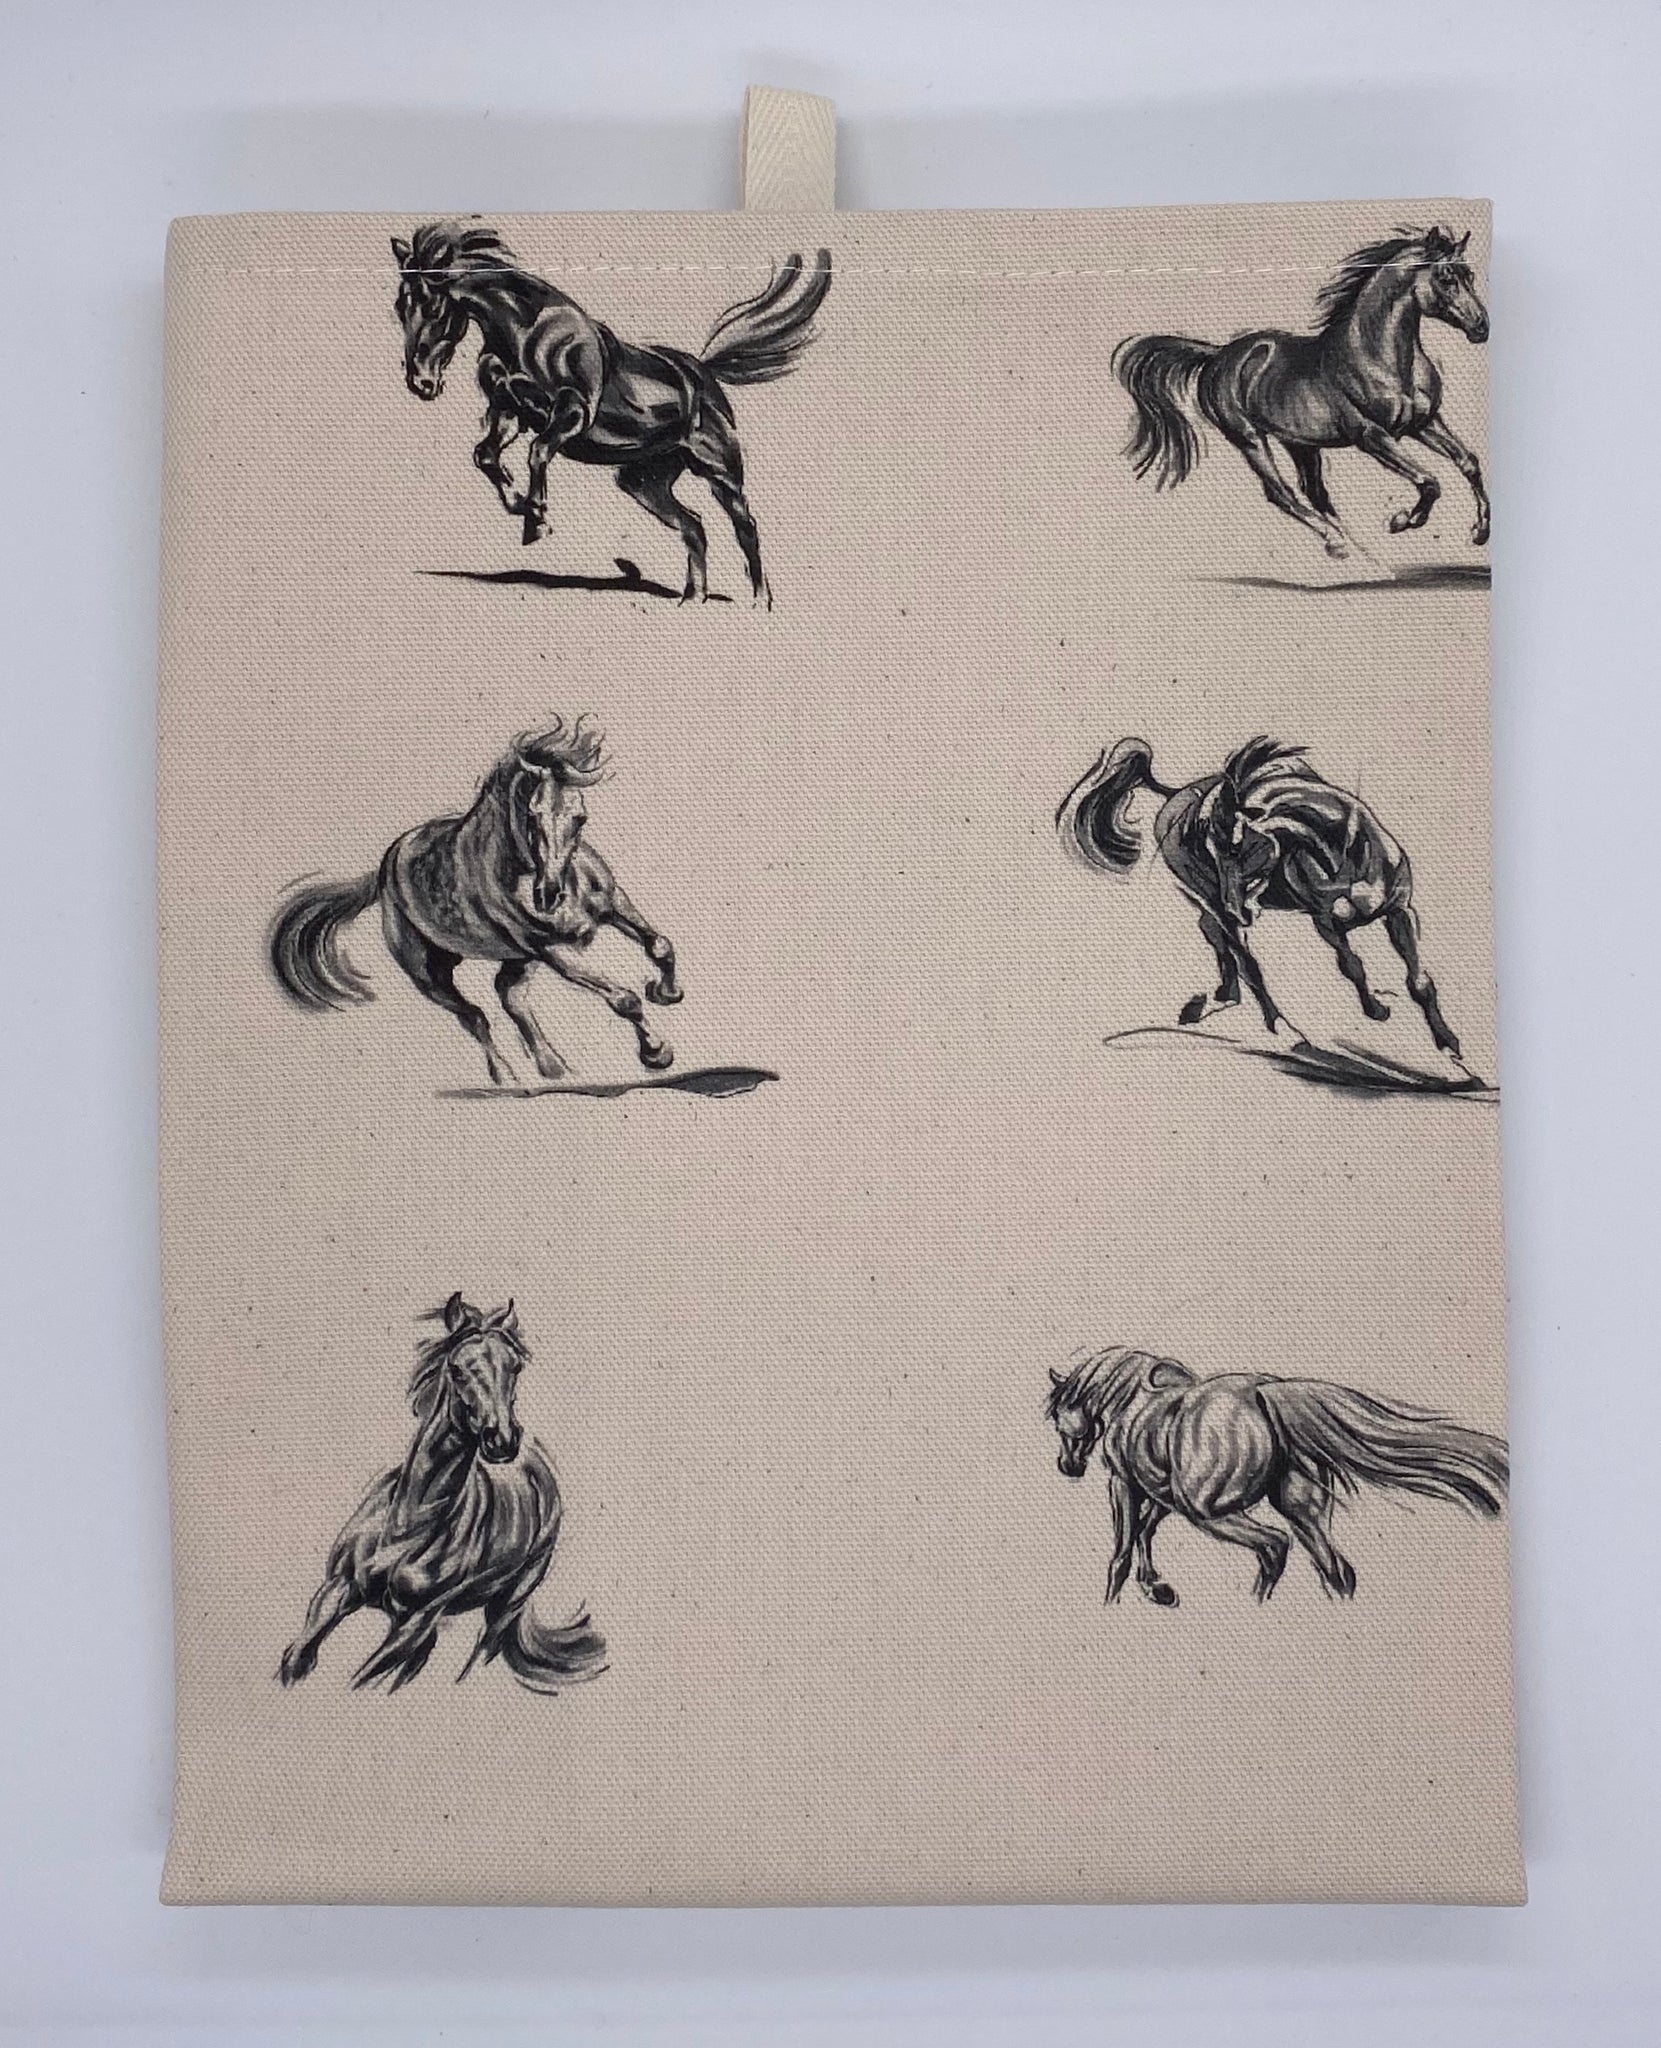 Summer Munch Horse Cotton Kitchen Towels - Set of 2 — Horse and Hound  Gallery